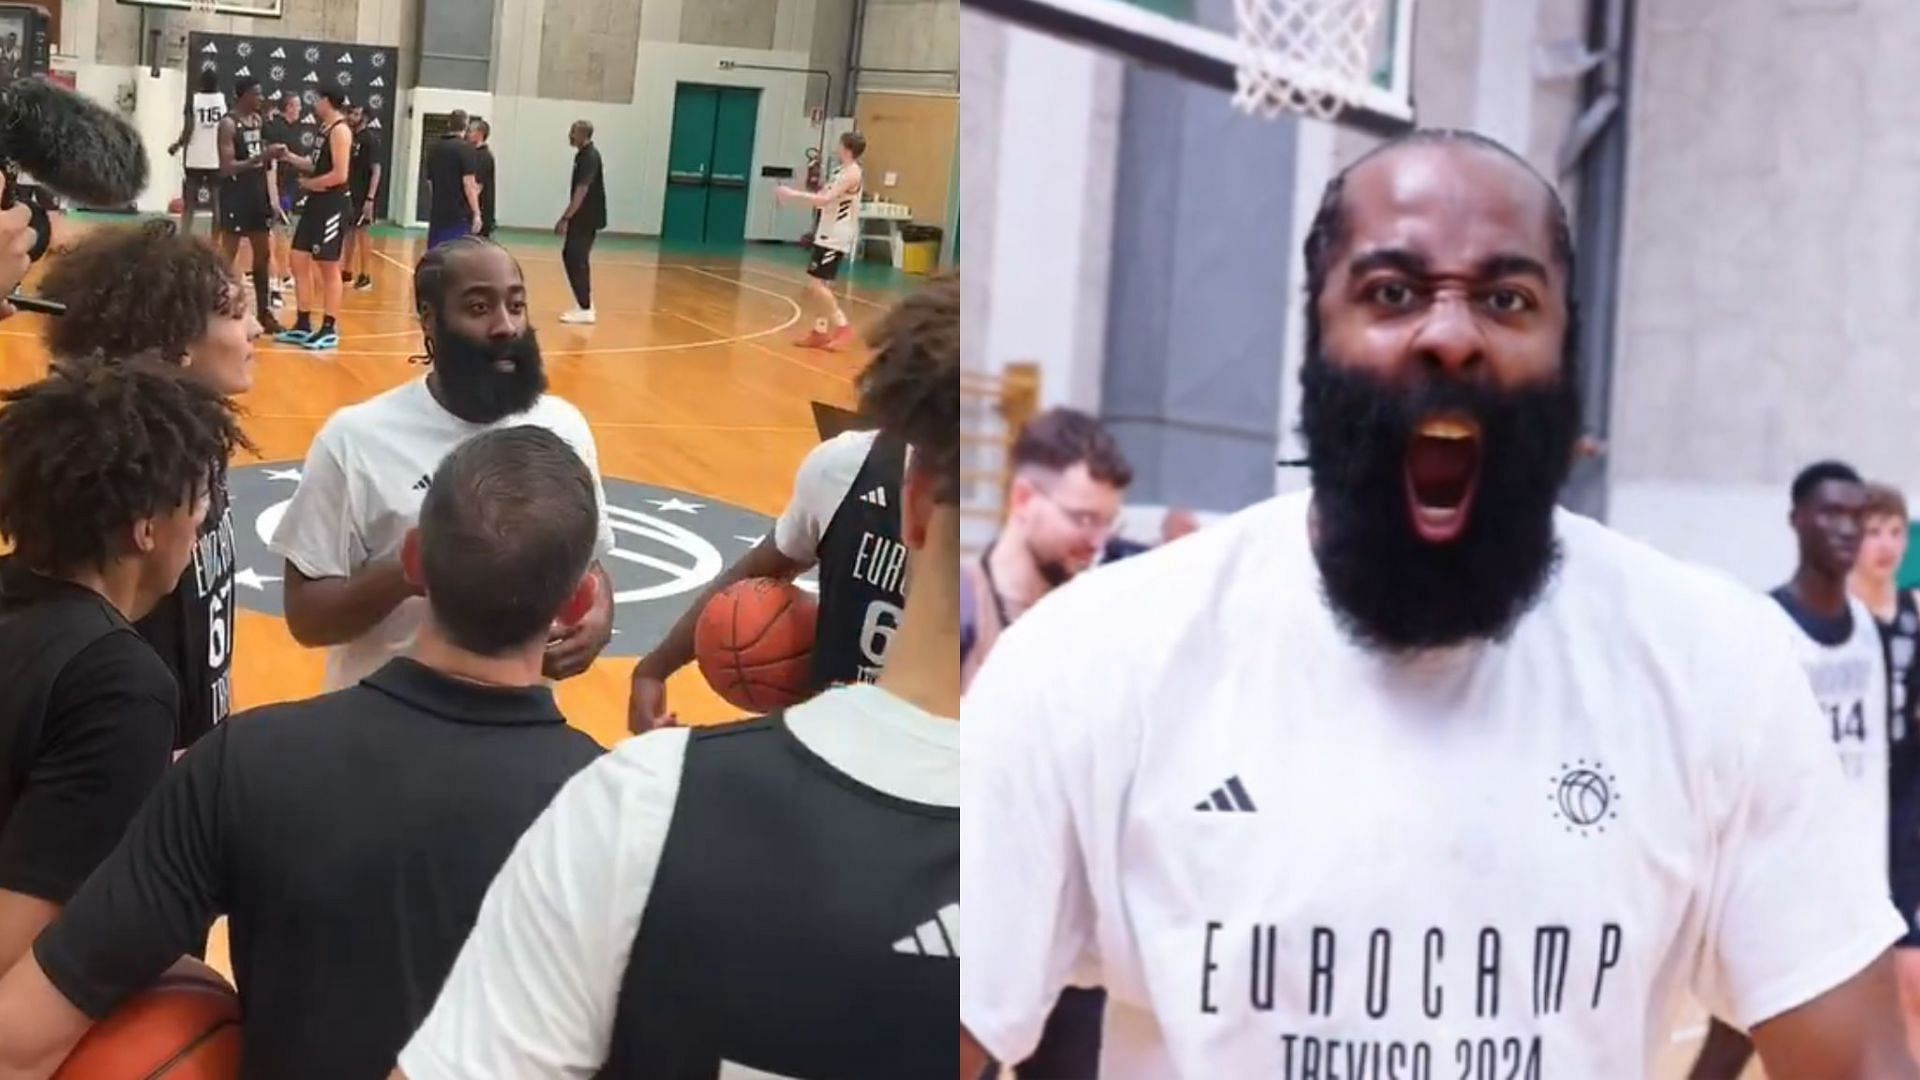 James Harden lights up Adidas Eurocamp in Italy (Screenshots from HoopsHype and Swish Cultures on X)